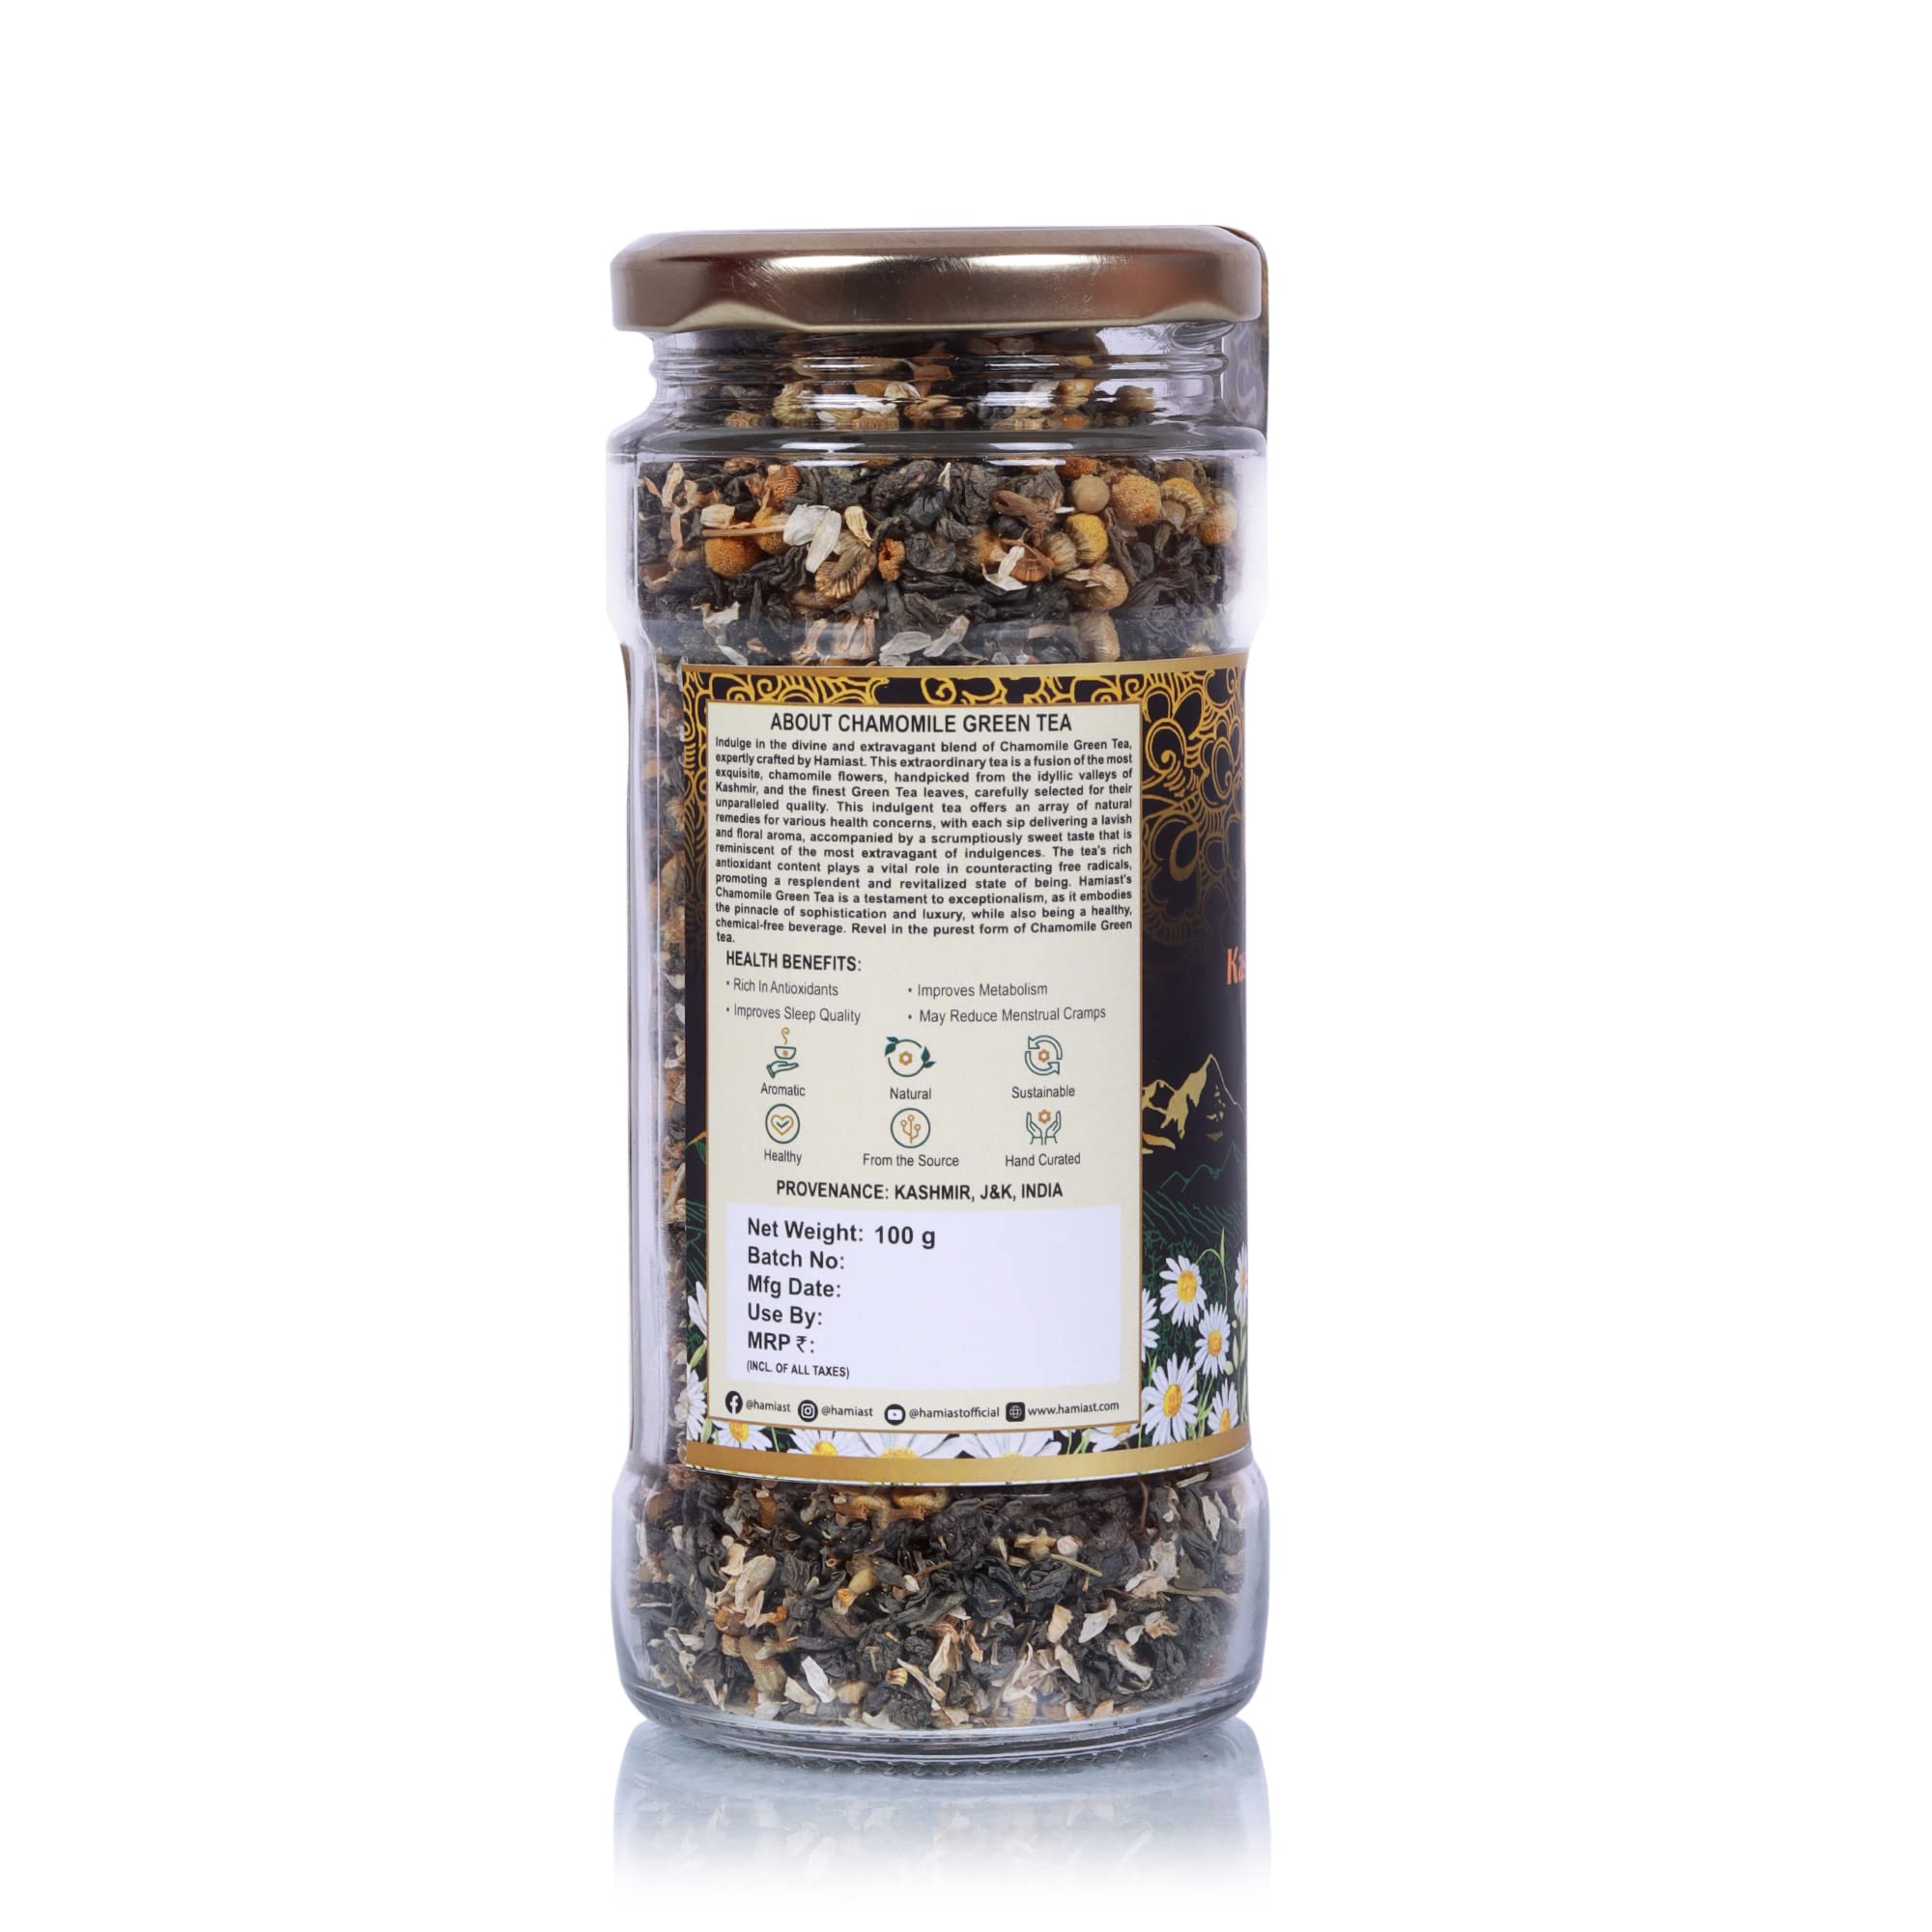 Hamiast Kashmir Chamomile Green Tea for Stress Relief & Good Sleep, Whole Leaf & Natural Chamomile Flowers 100g Serves 50 Cups